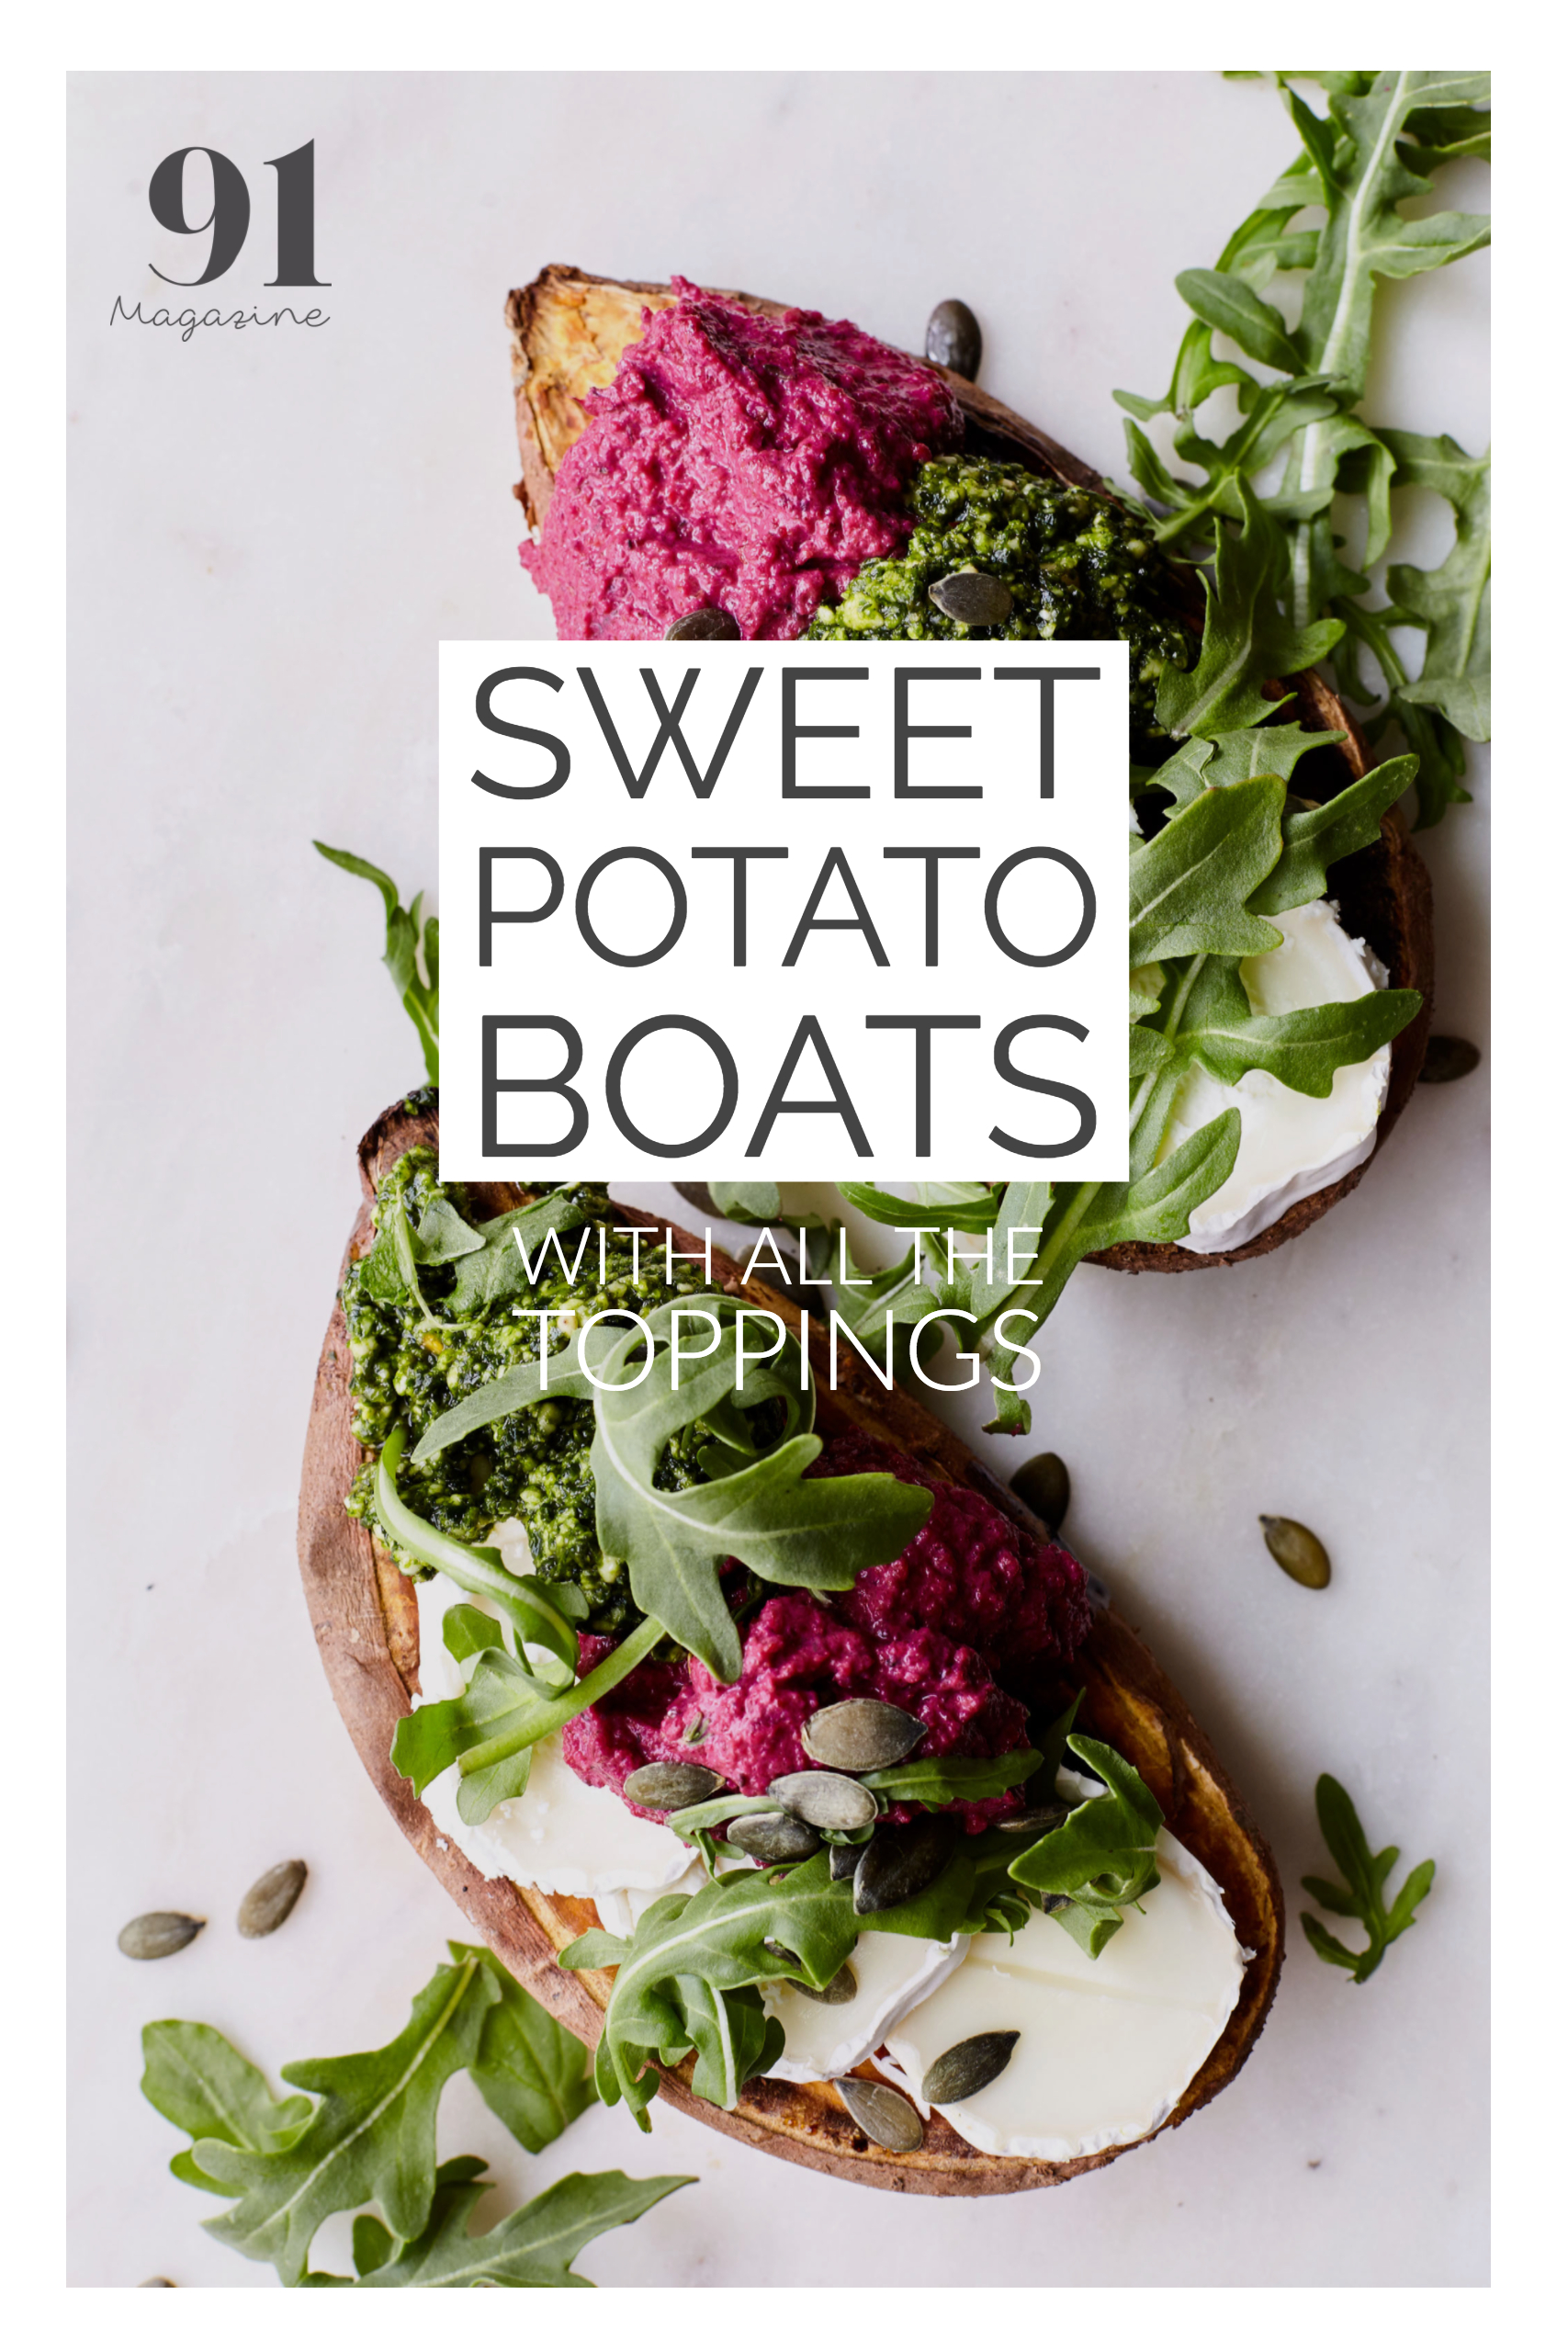 RECIPE: Sweet potato boats with all the toppings